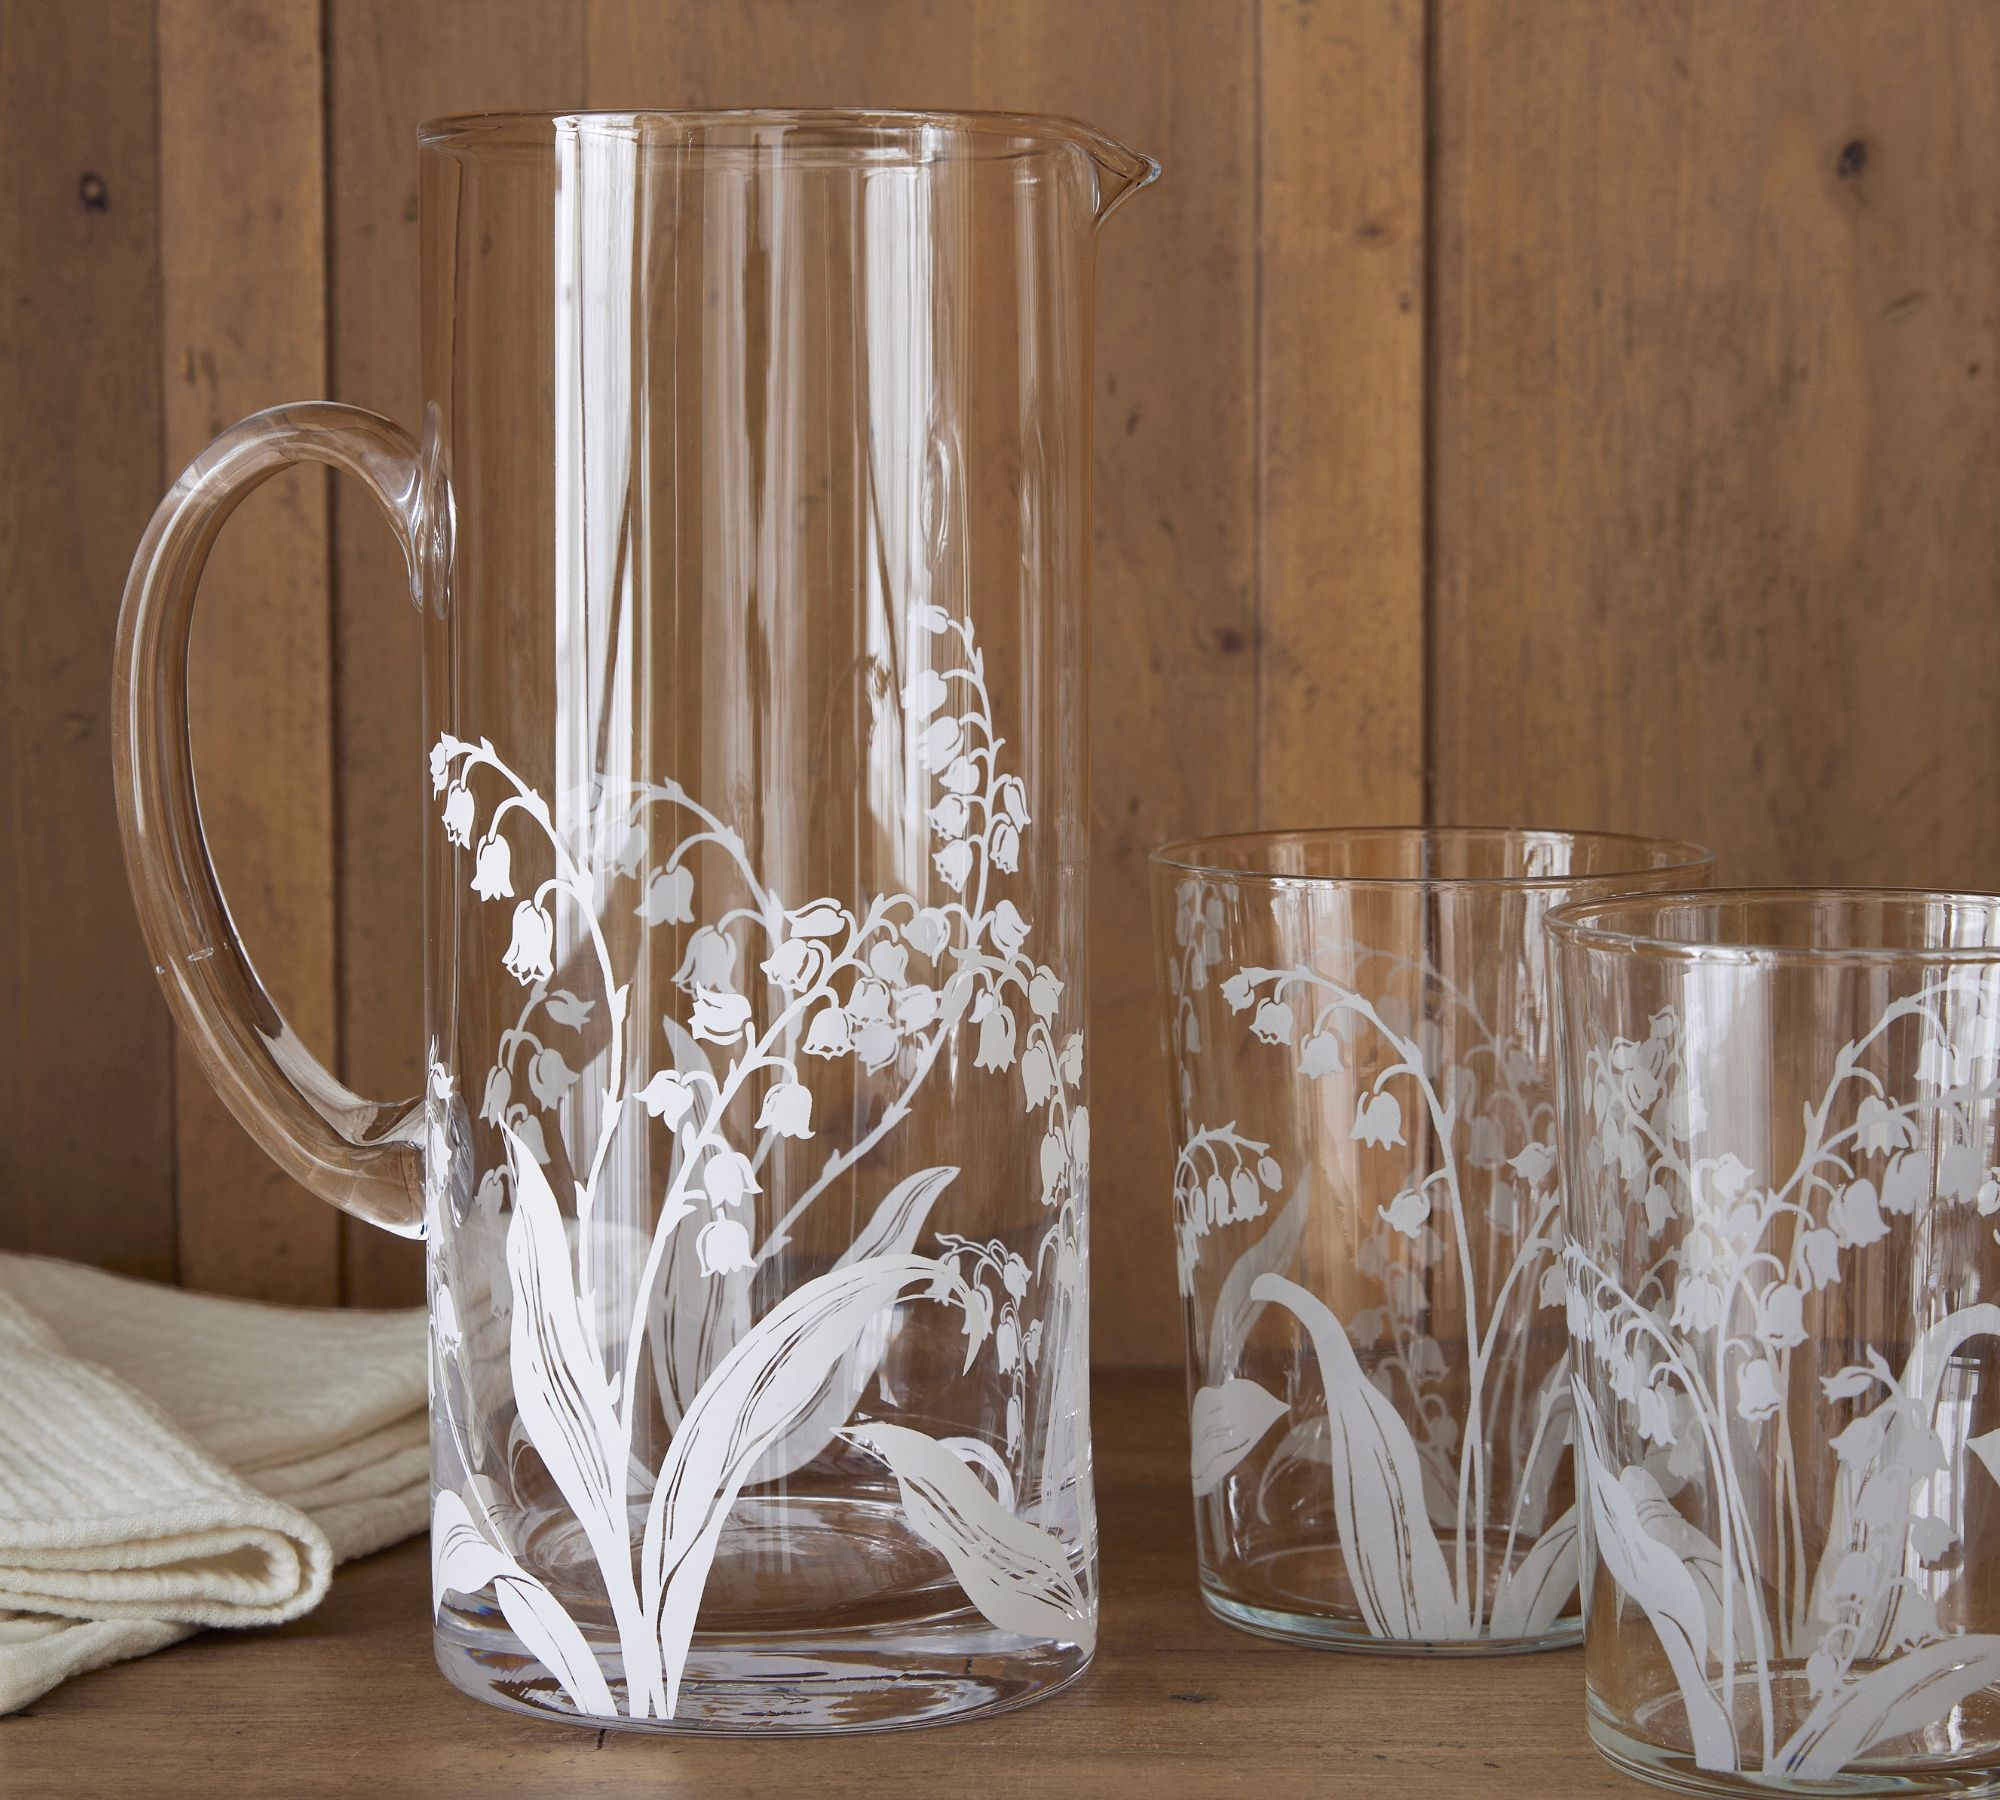 Monique Lhuillier Lily of the Valley Pitcher